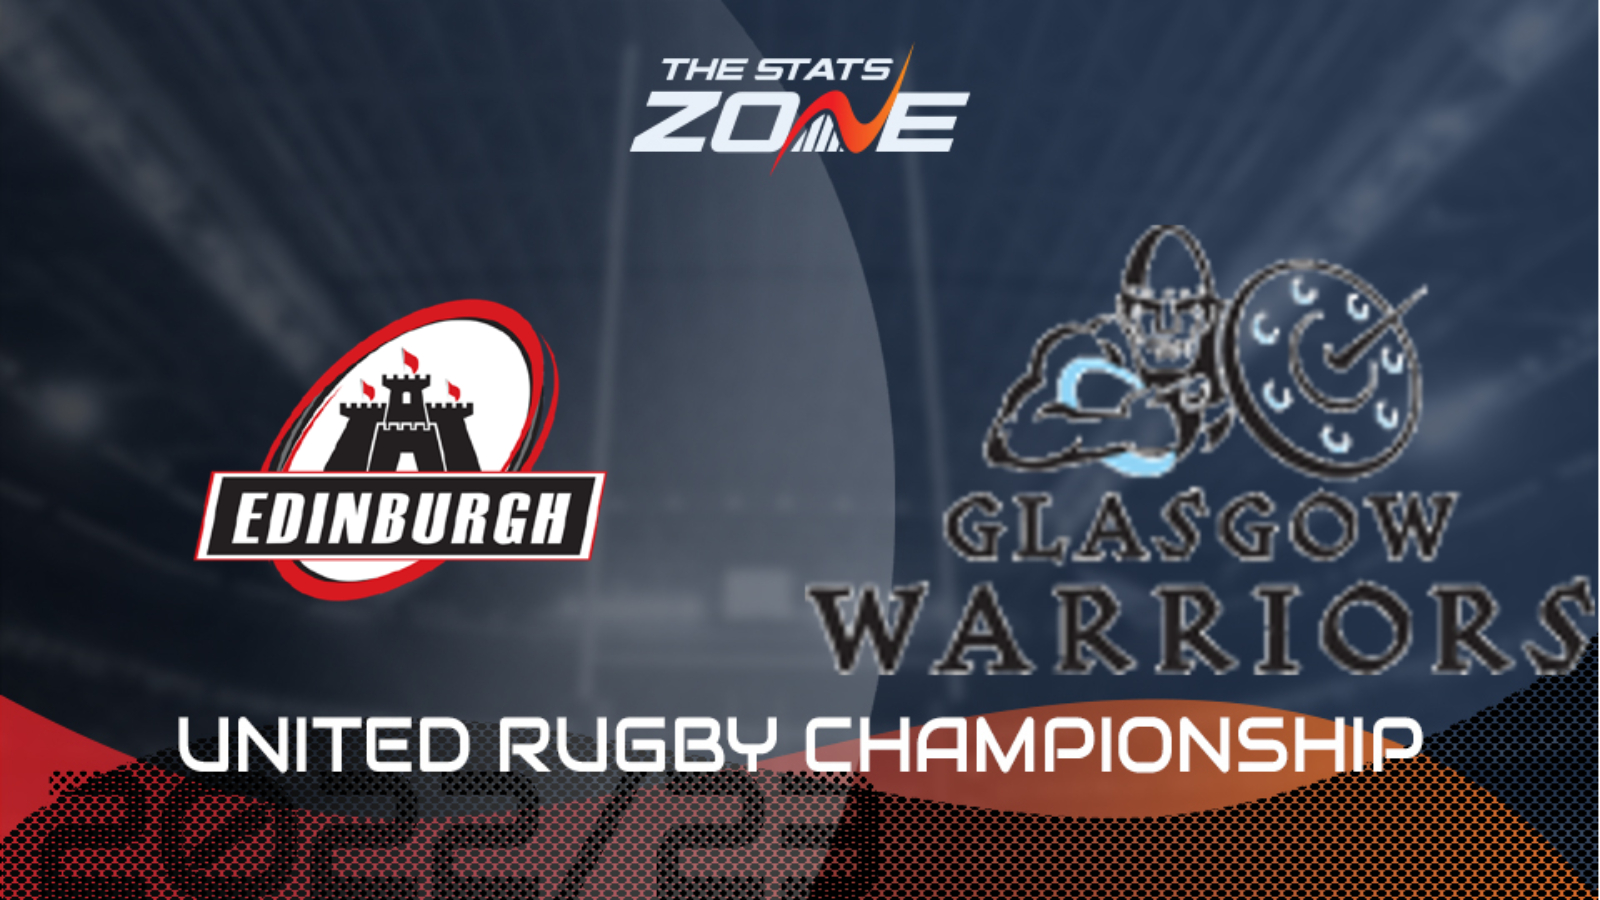 Edinburgh vs Glasgow Warriors Preview and Prediction 2022-23 United Rugby Championship